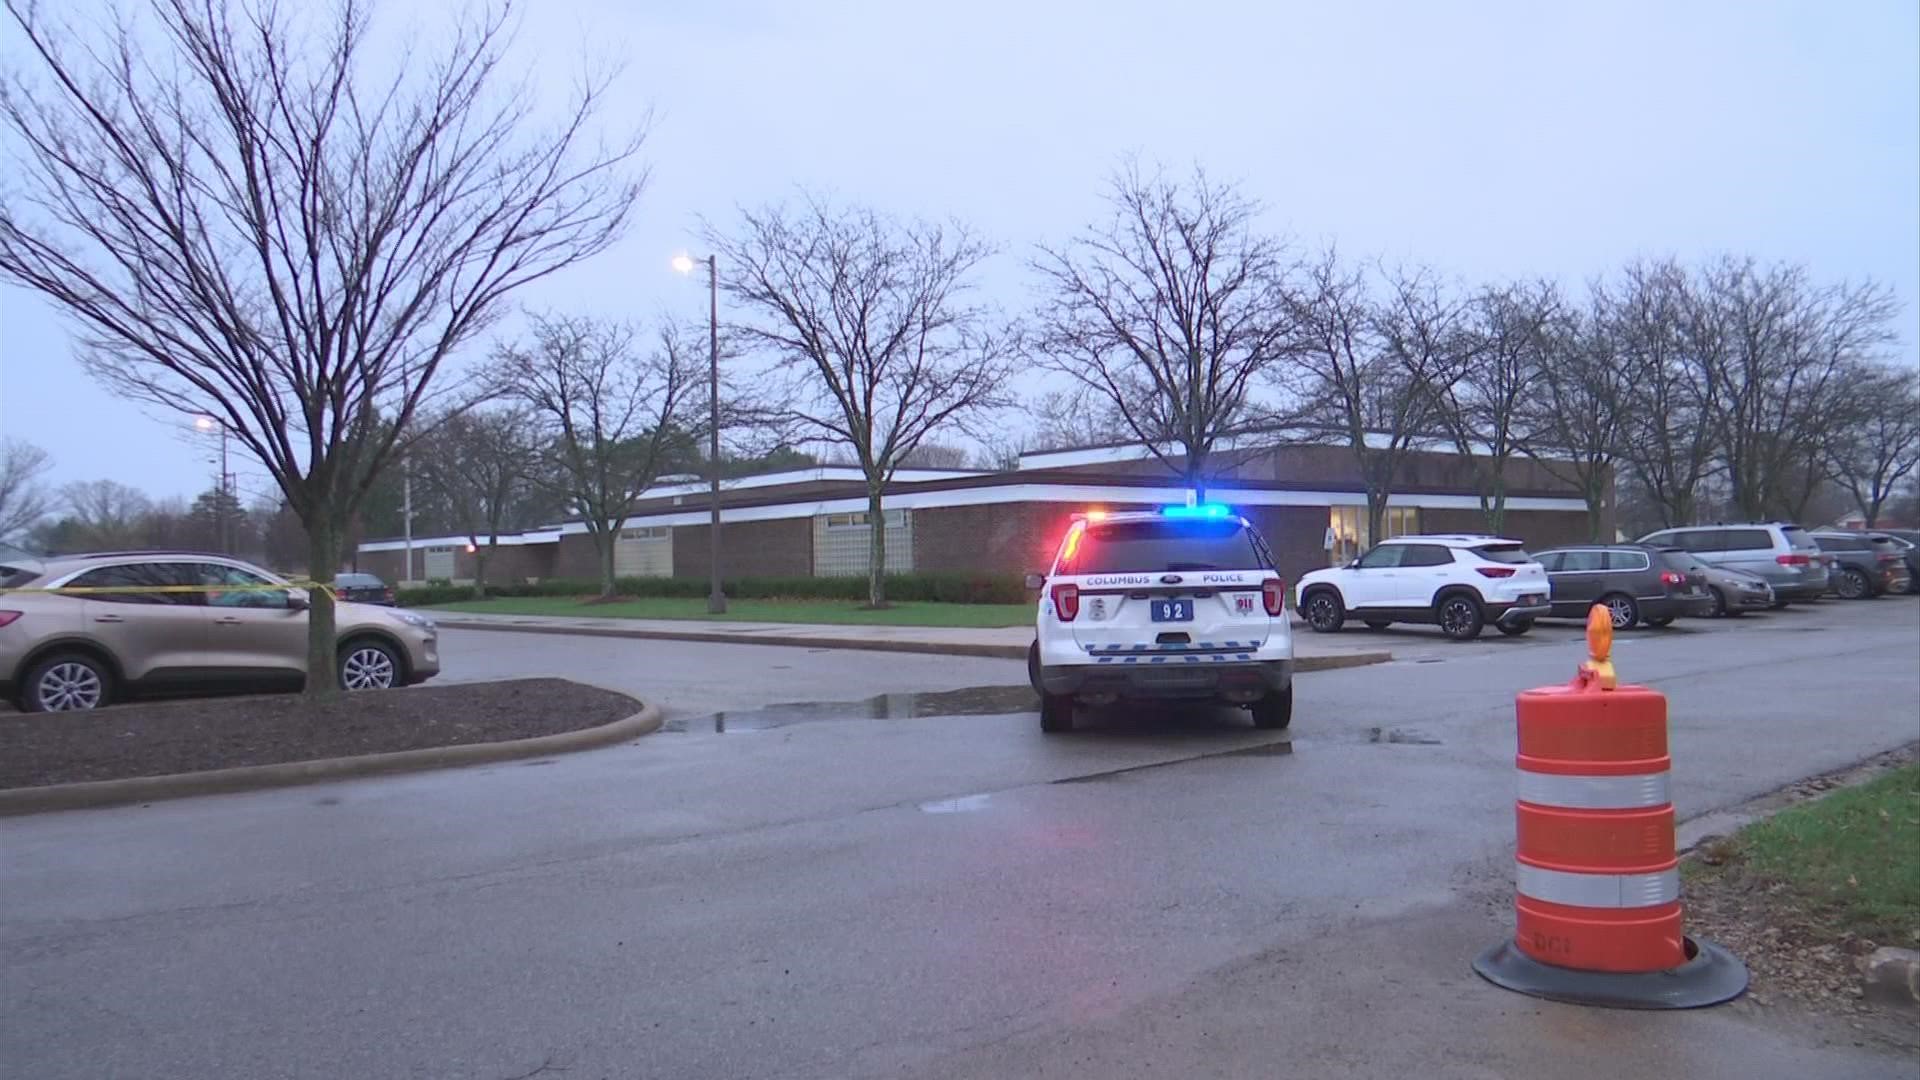 An employee tells 10TV the shooting happened in the center's parking lot.